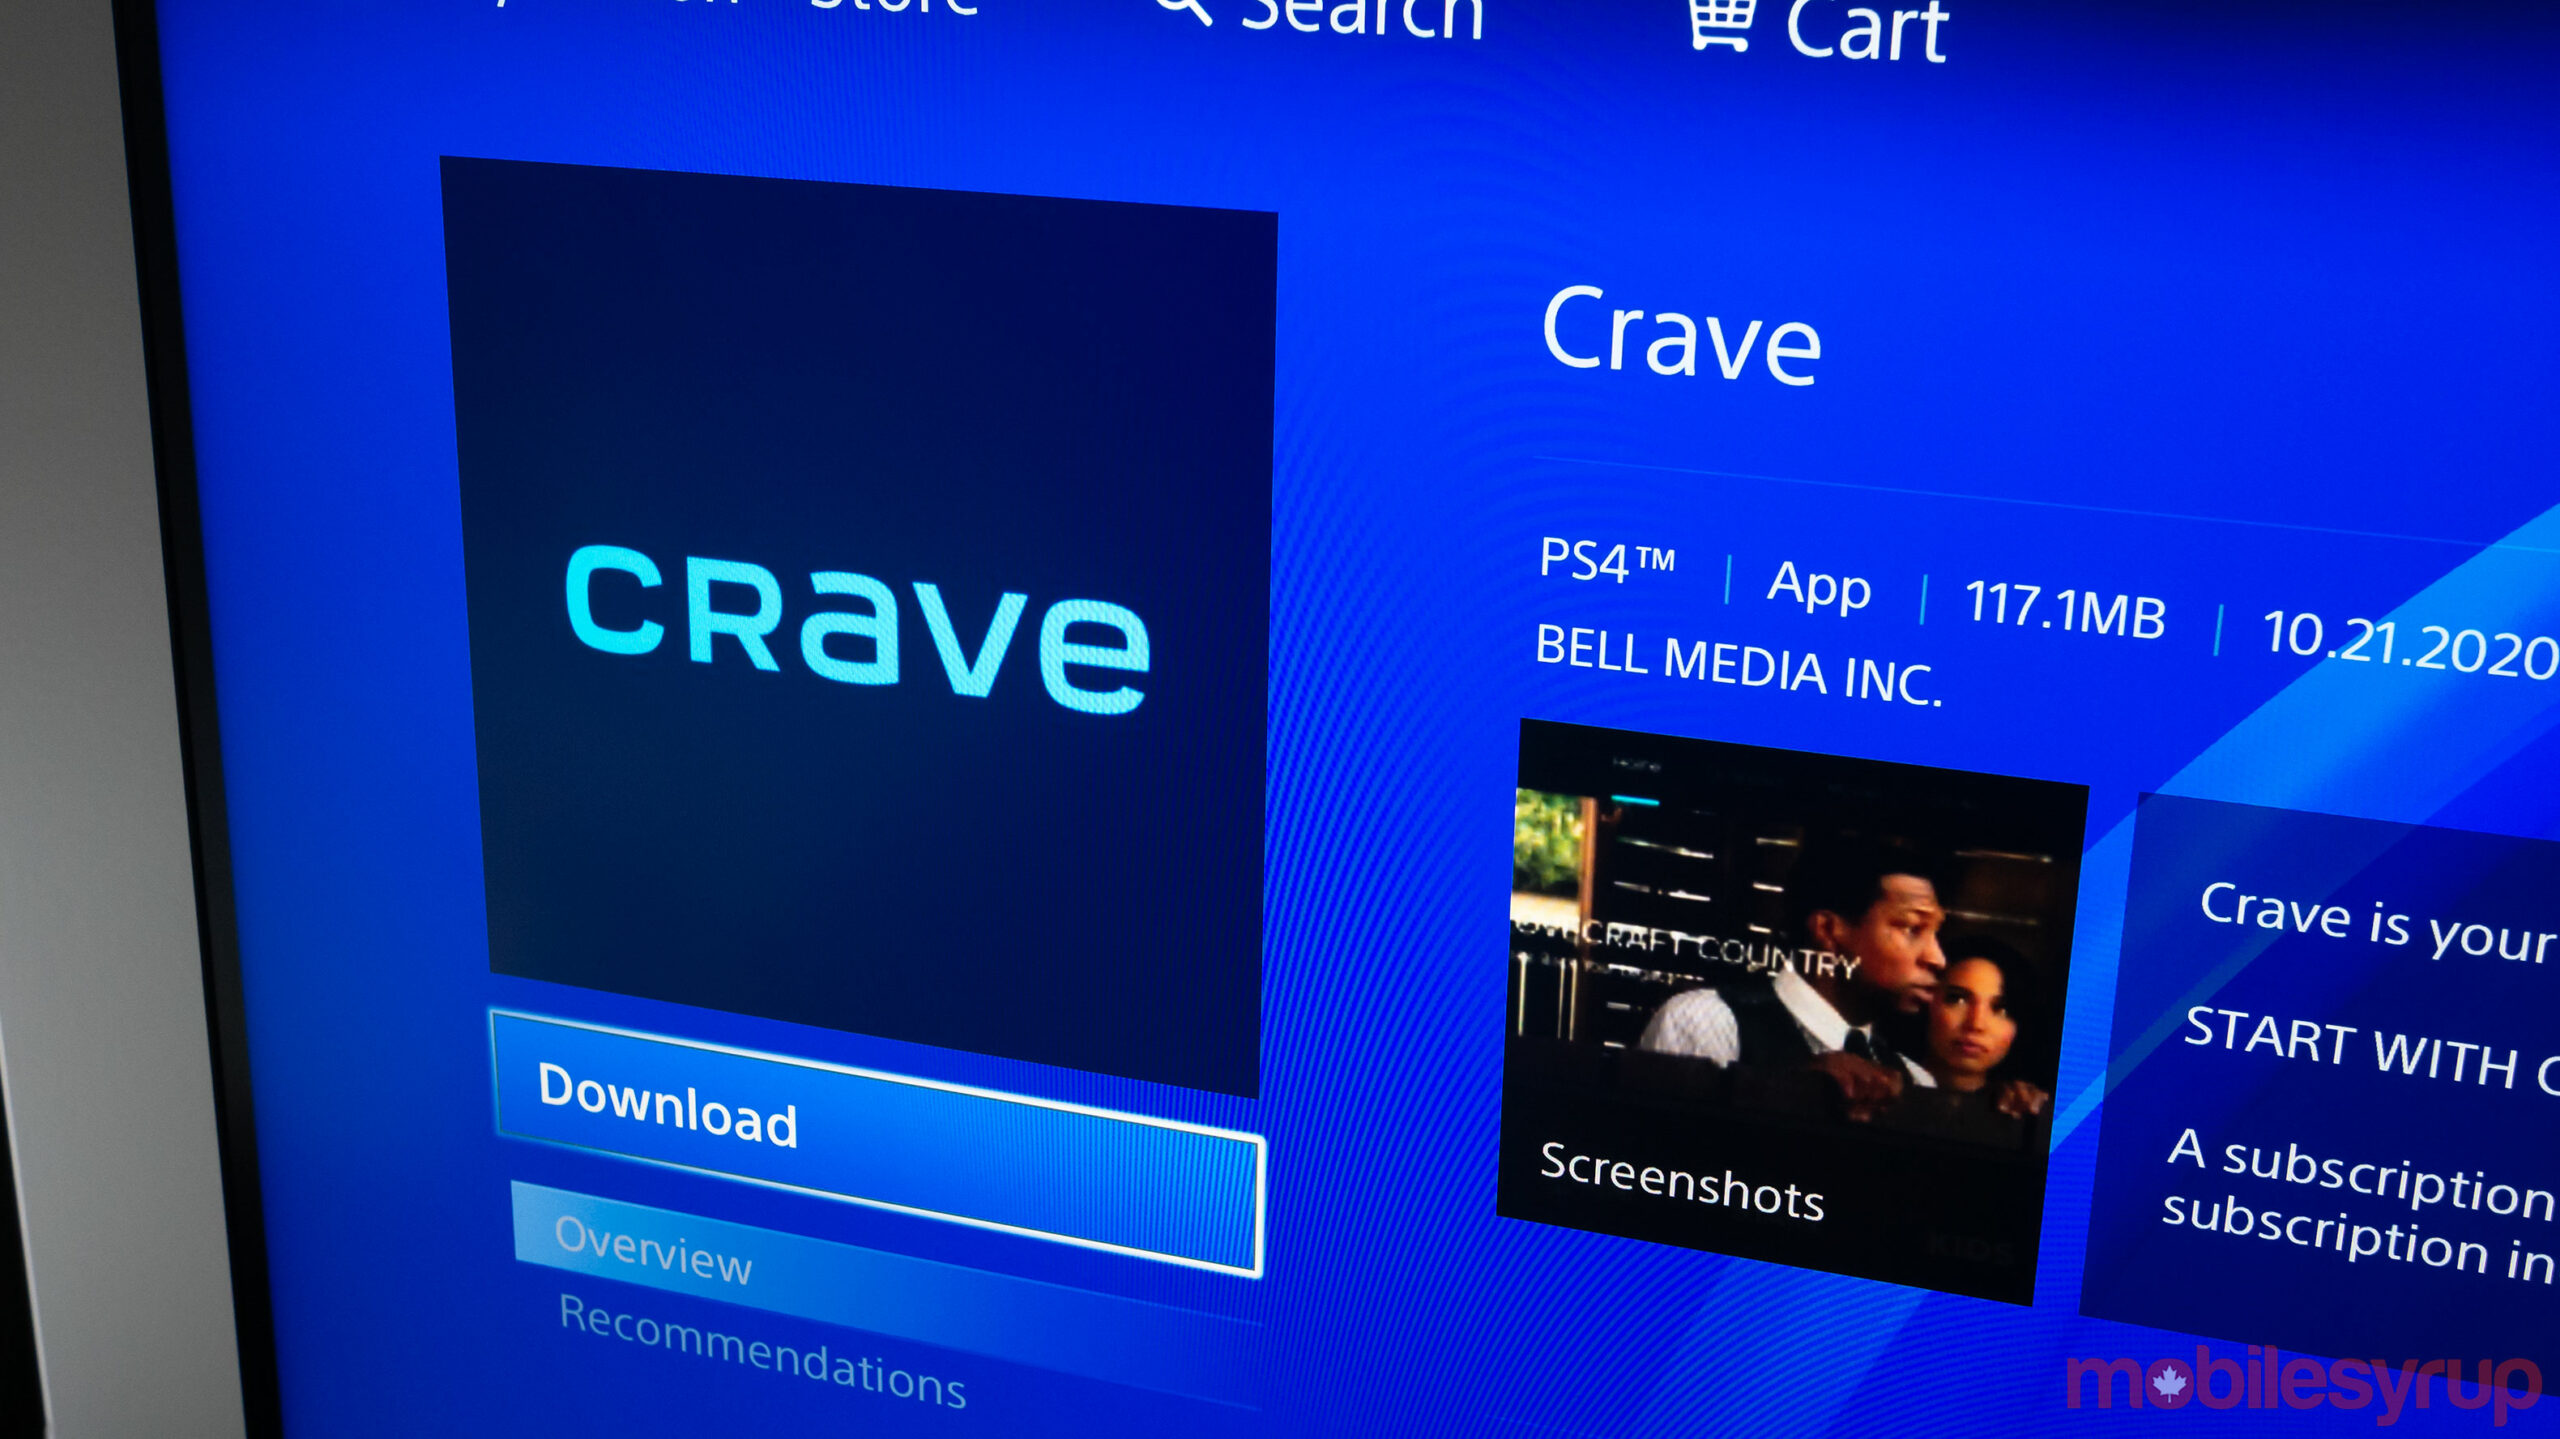 crave on ps3